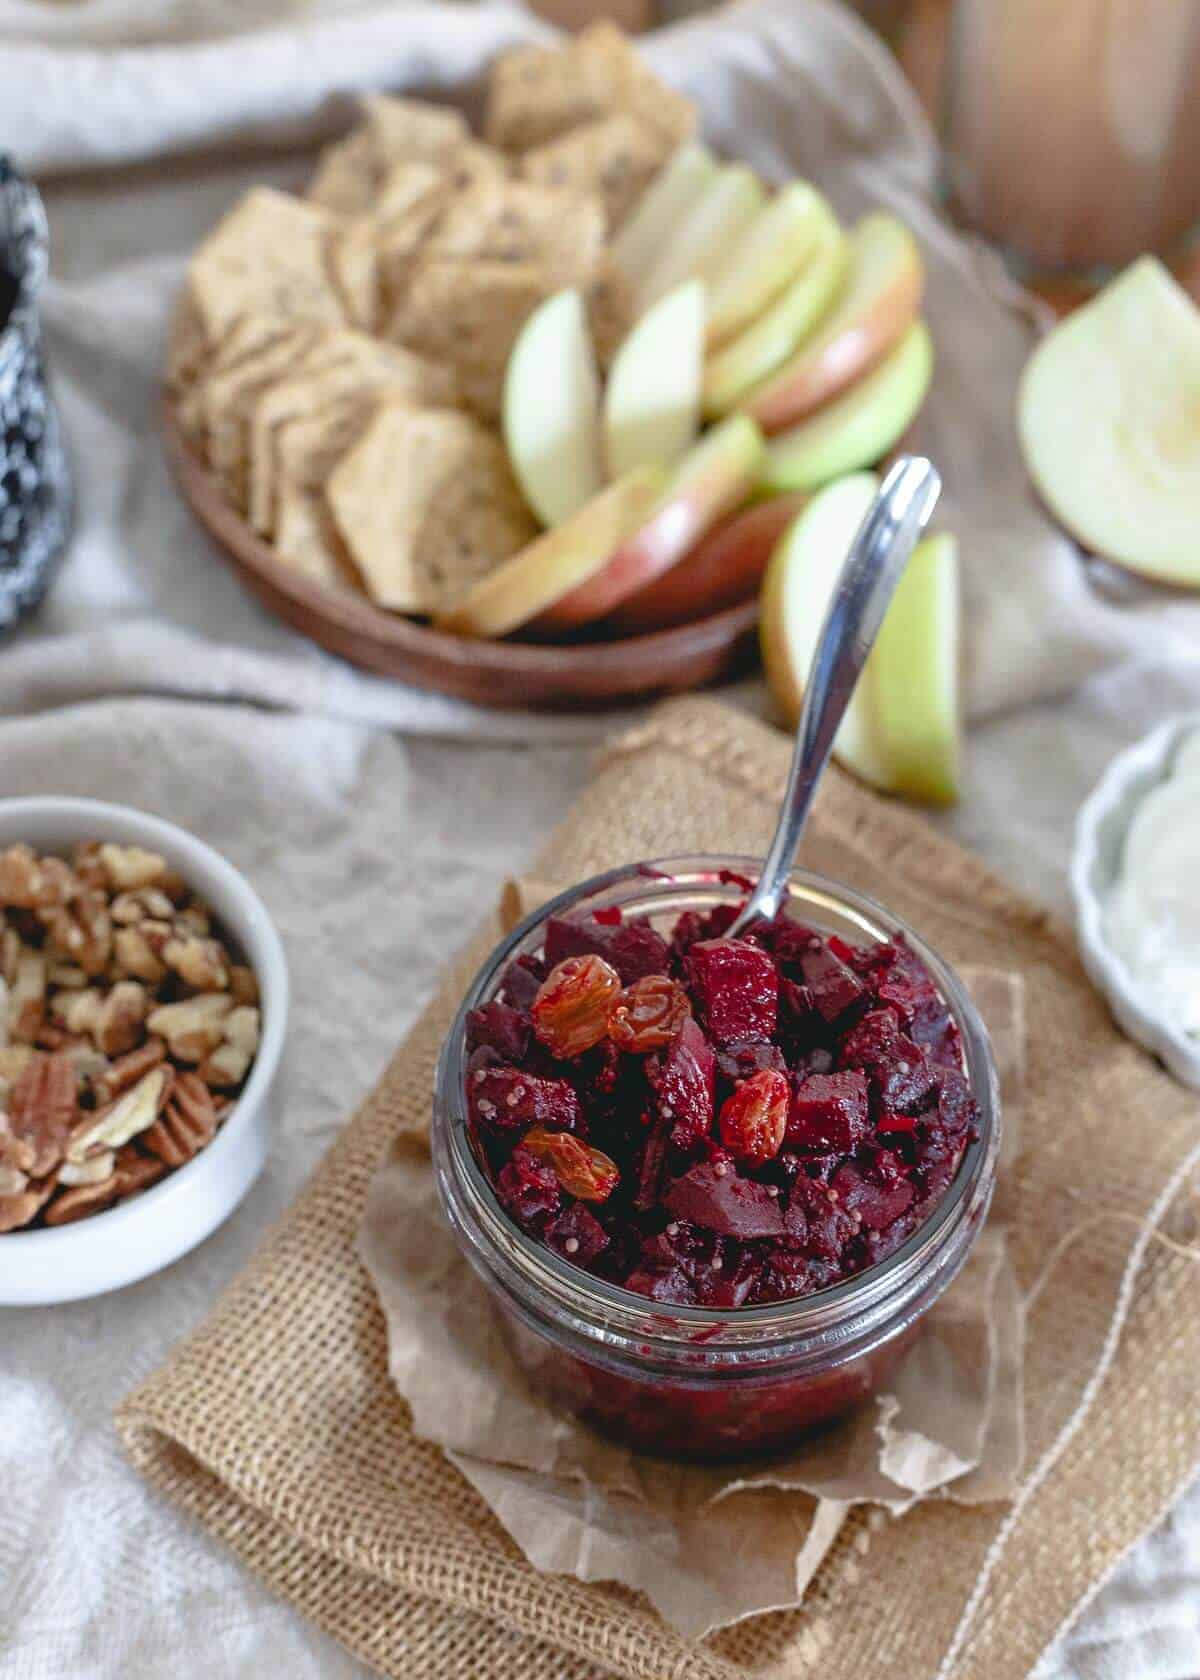 This beet apple chutney is infused with orange and lots of warming winter spices. A great spread on crackers, accompaniment to meat or even dolloped in yogurt!